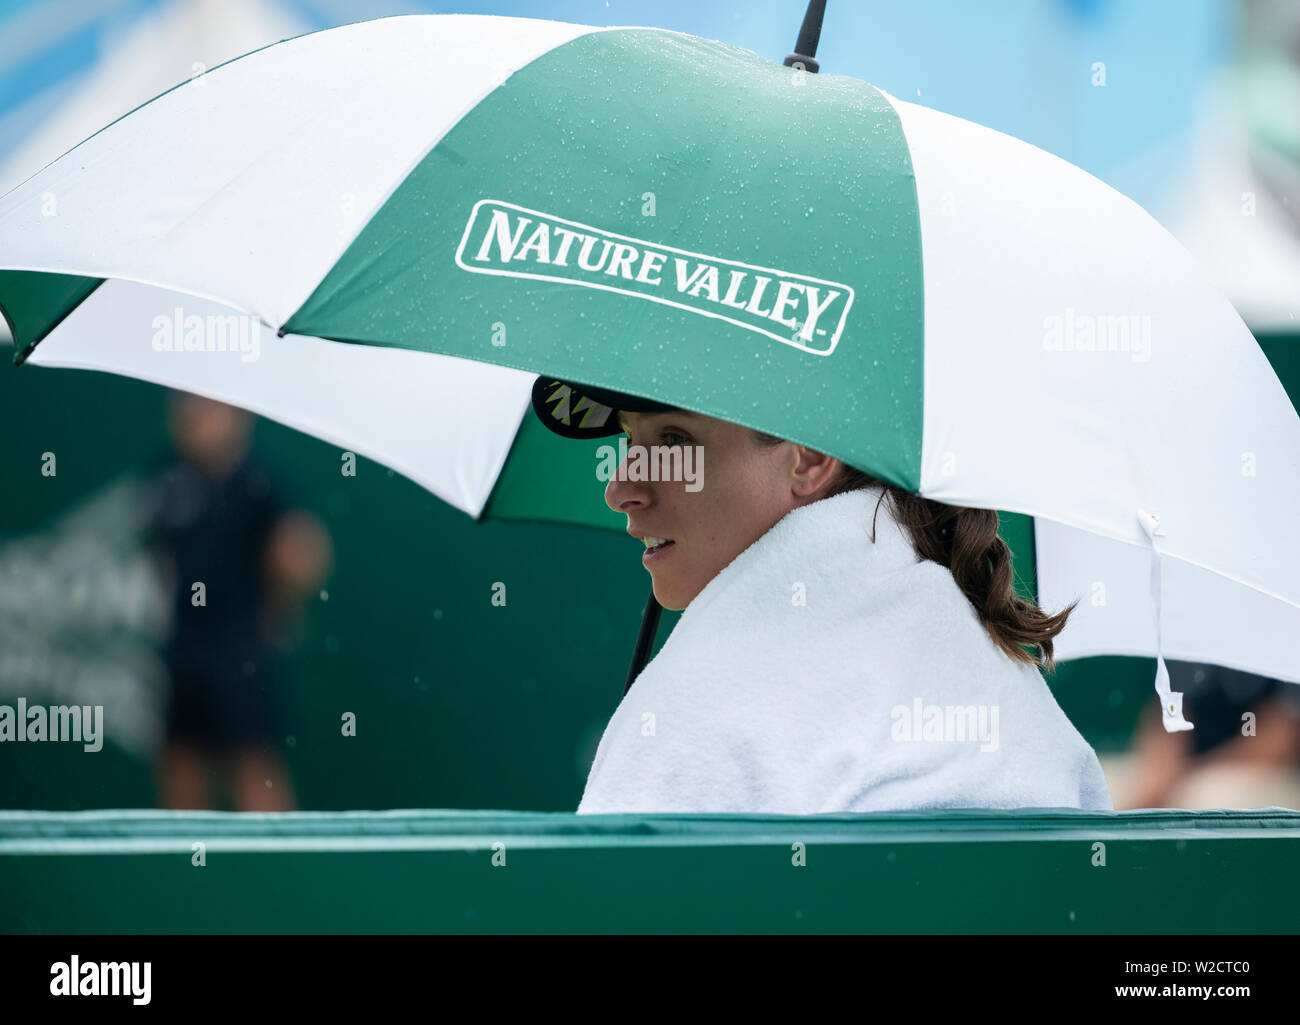 Johanna Konta of GBR sheltering under umbrella before start of match against Ons Jabeur of Tunisia at Nature Valley International 2019, Devonshire Par Stock Photo